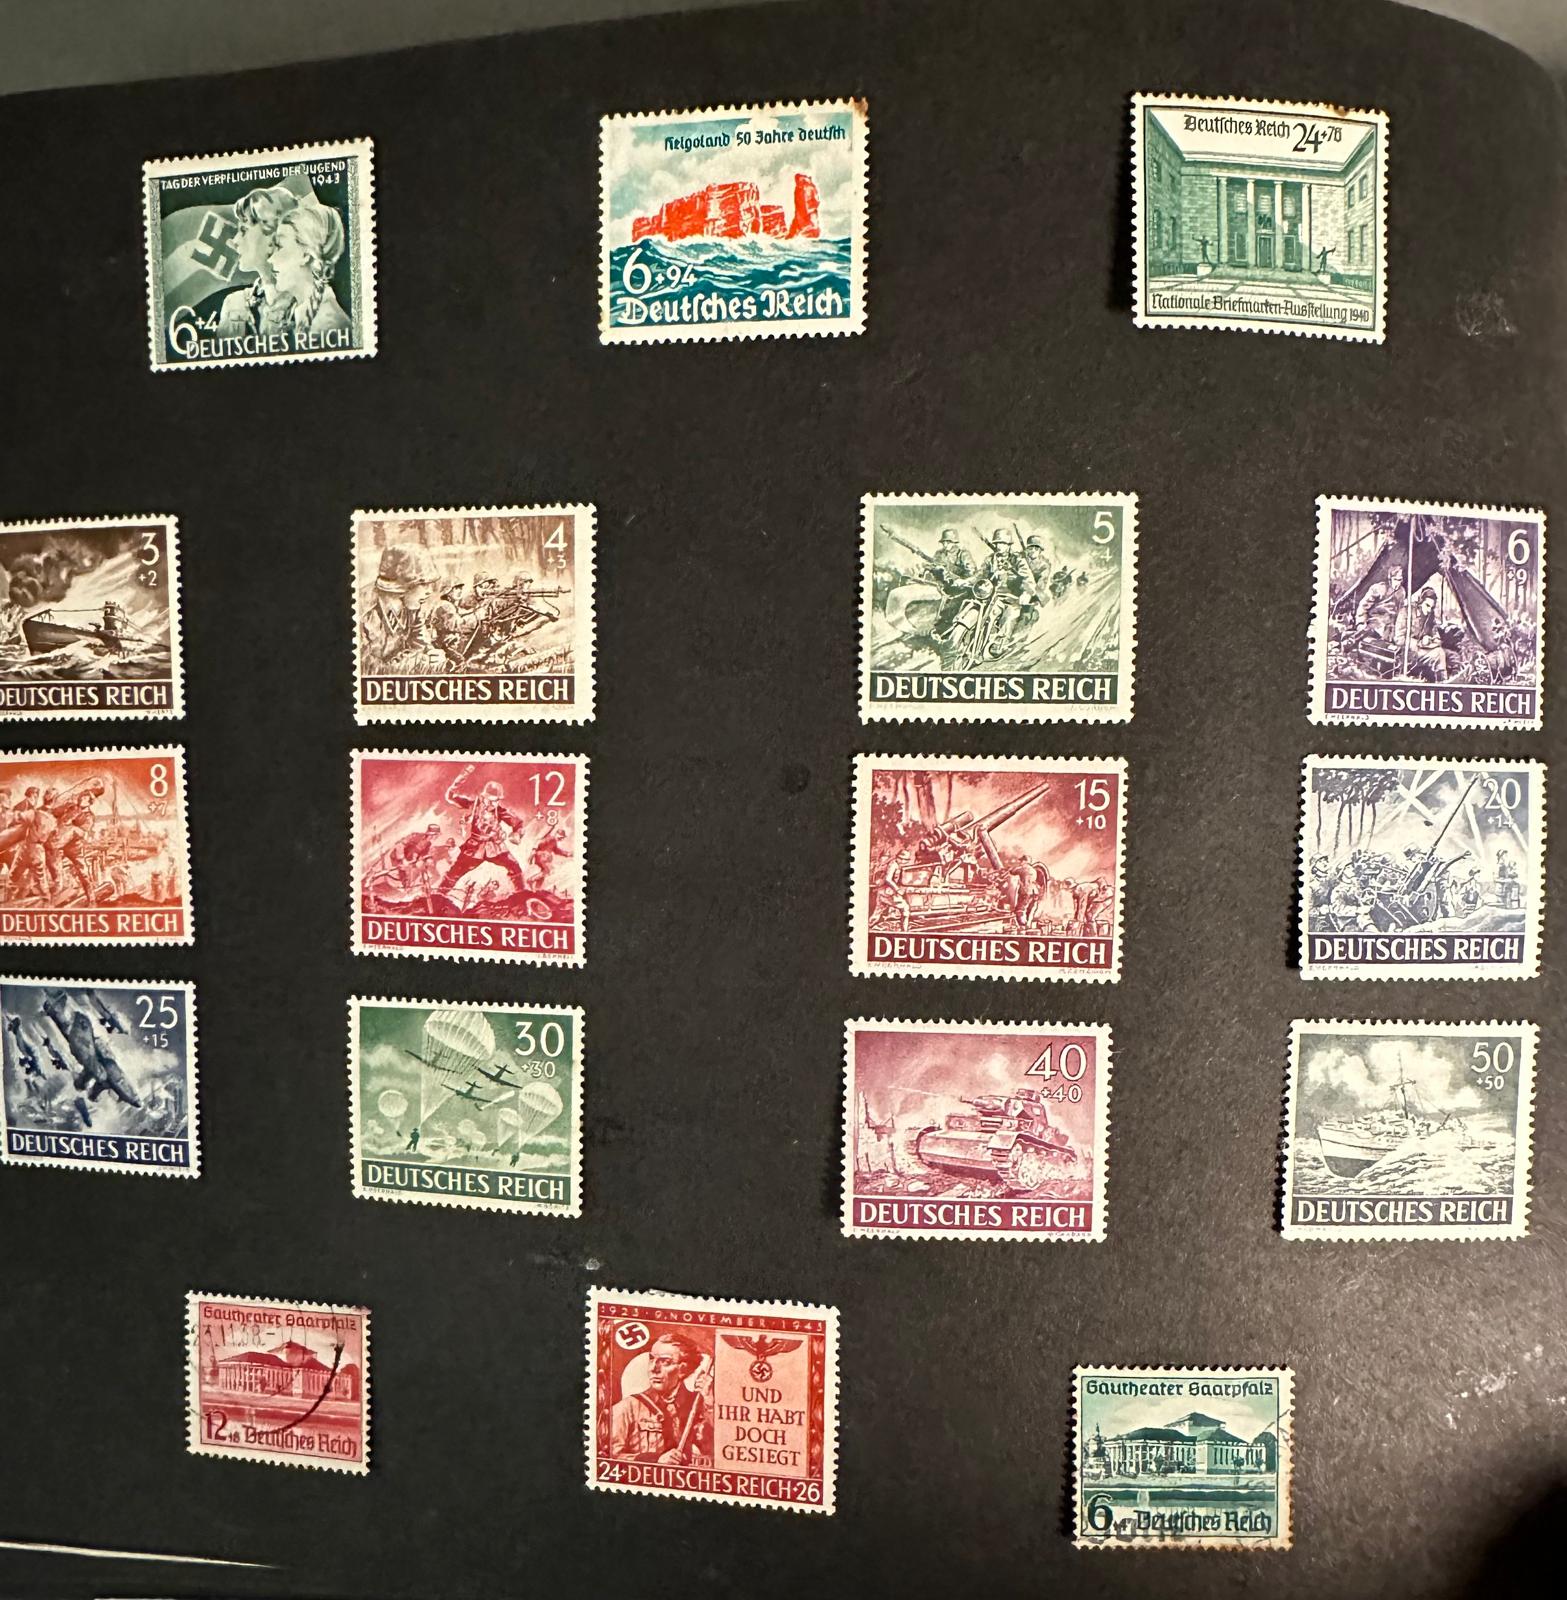 A WWII era German stamp album with a range of various stamps, denominations and issues. - Image 11 of 11